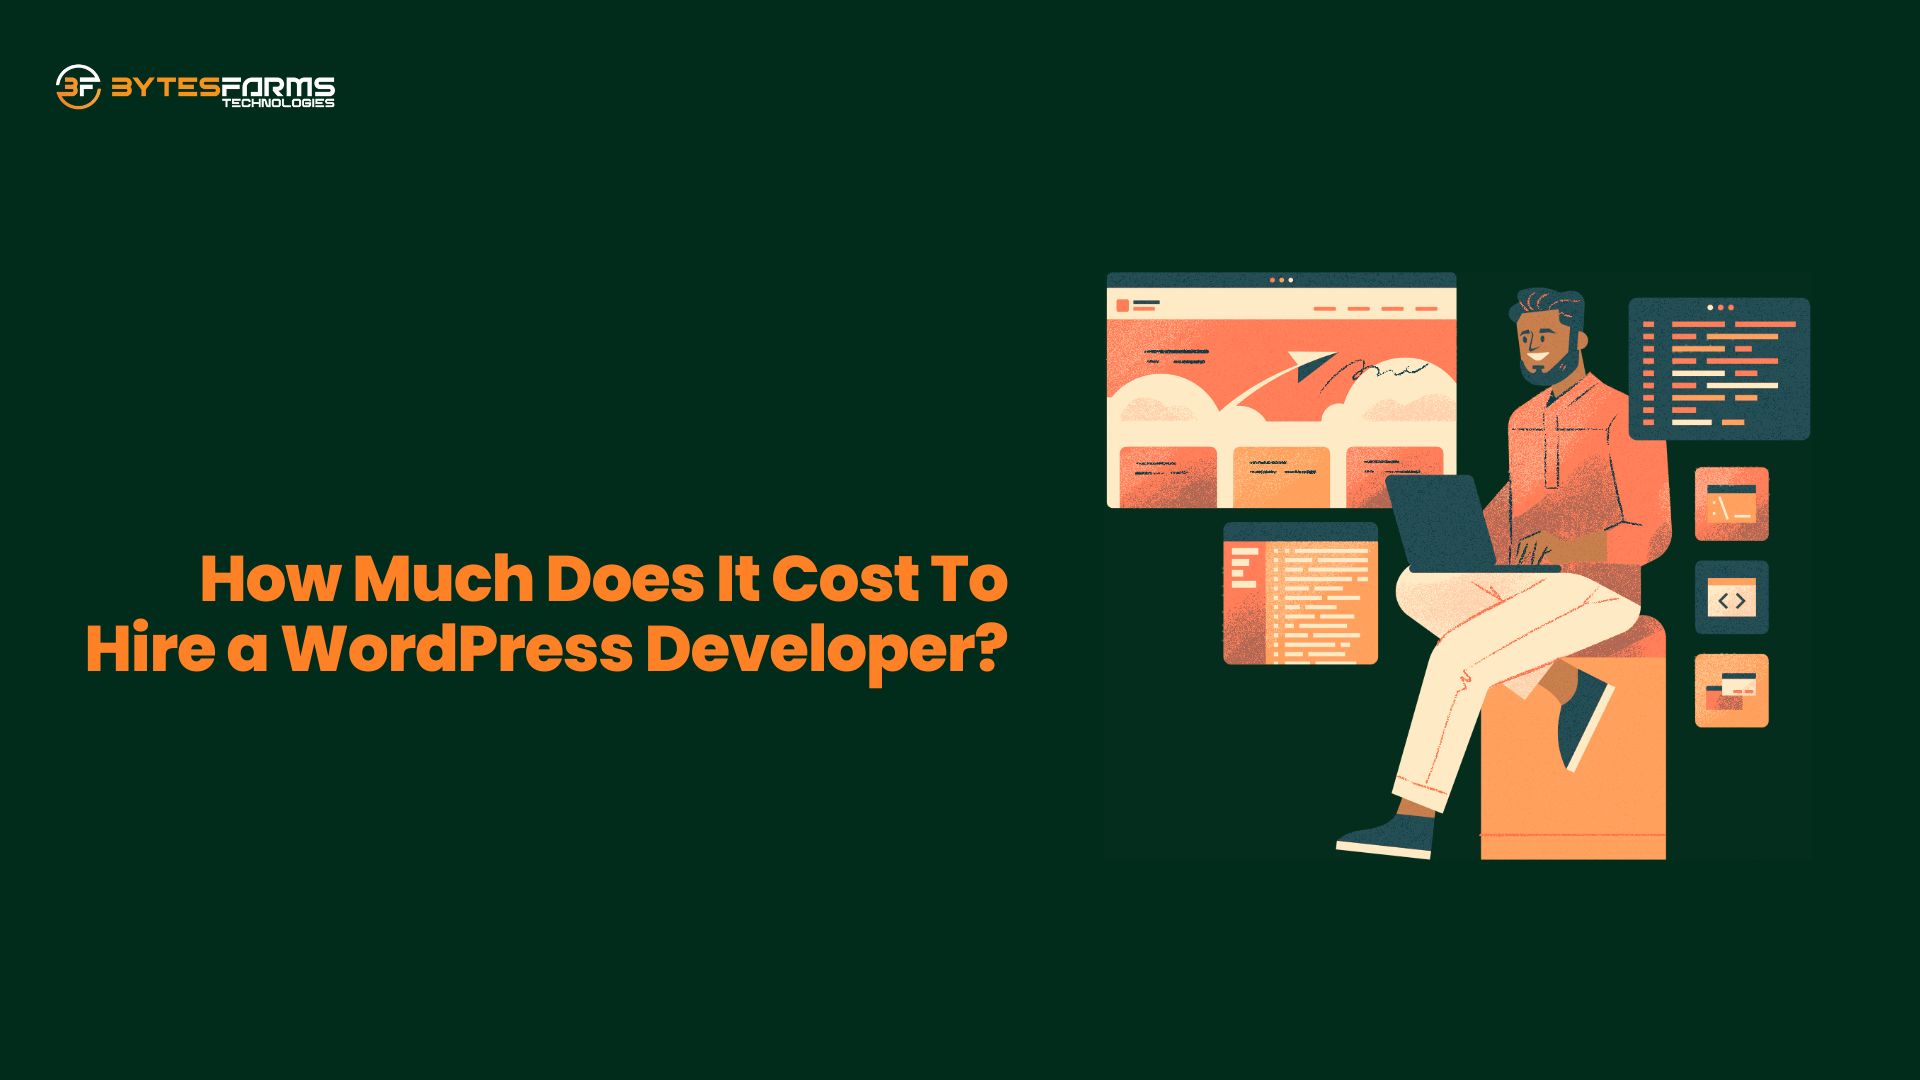 How Much Does It Cost To Hire a WordPress Developer?